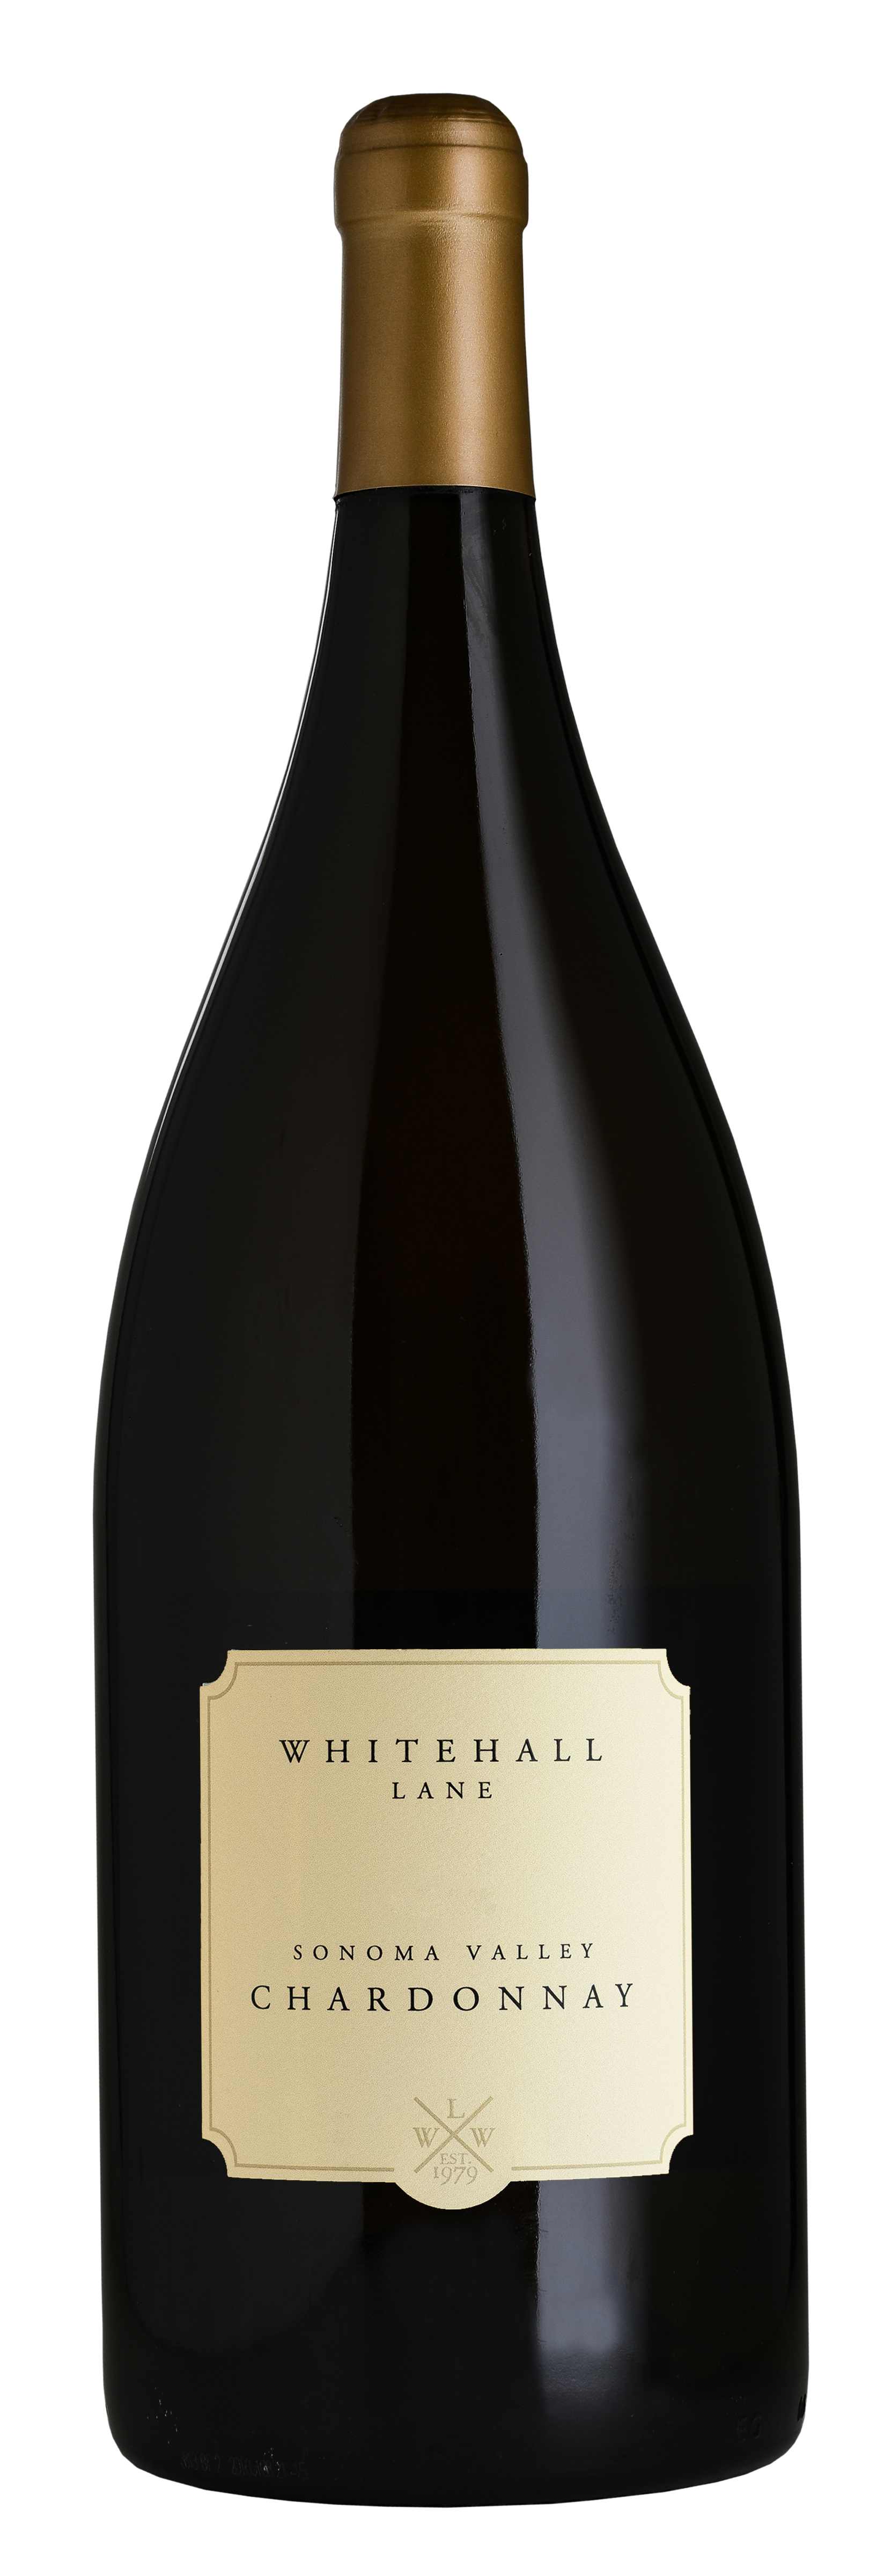 Product Image for 2019 Chardonnay, Sonoma Valley 1.5L